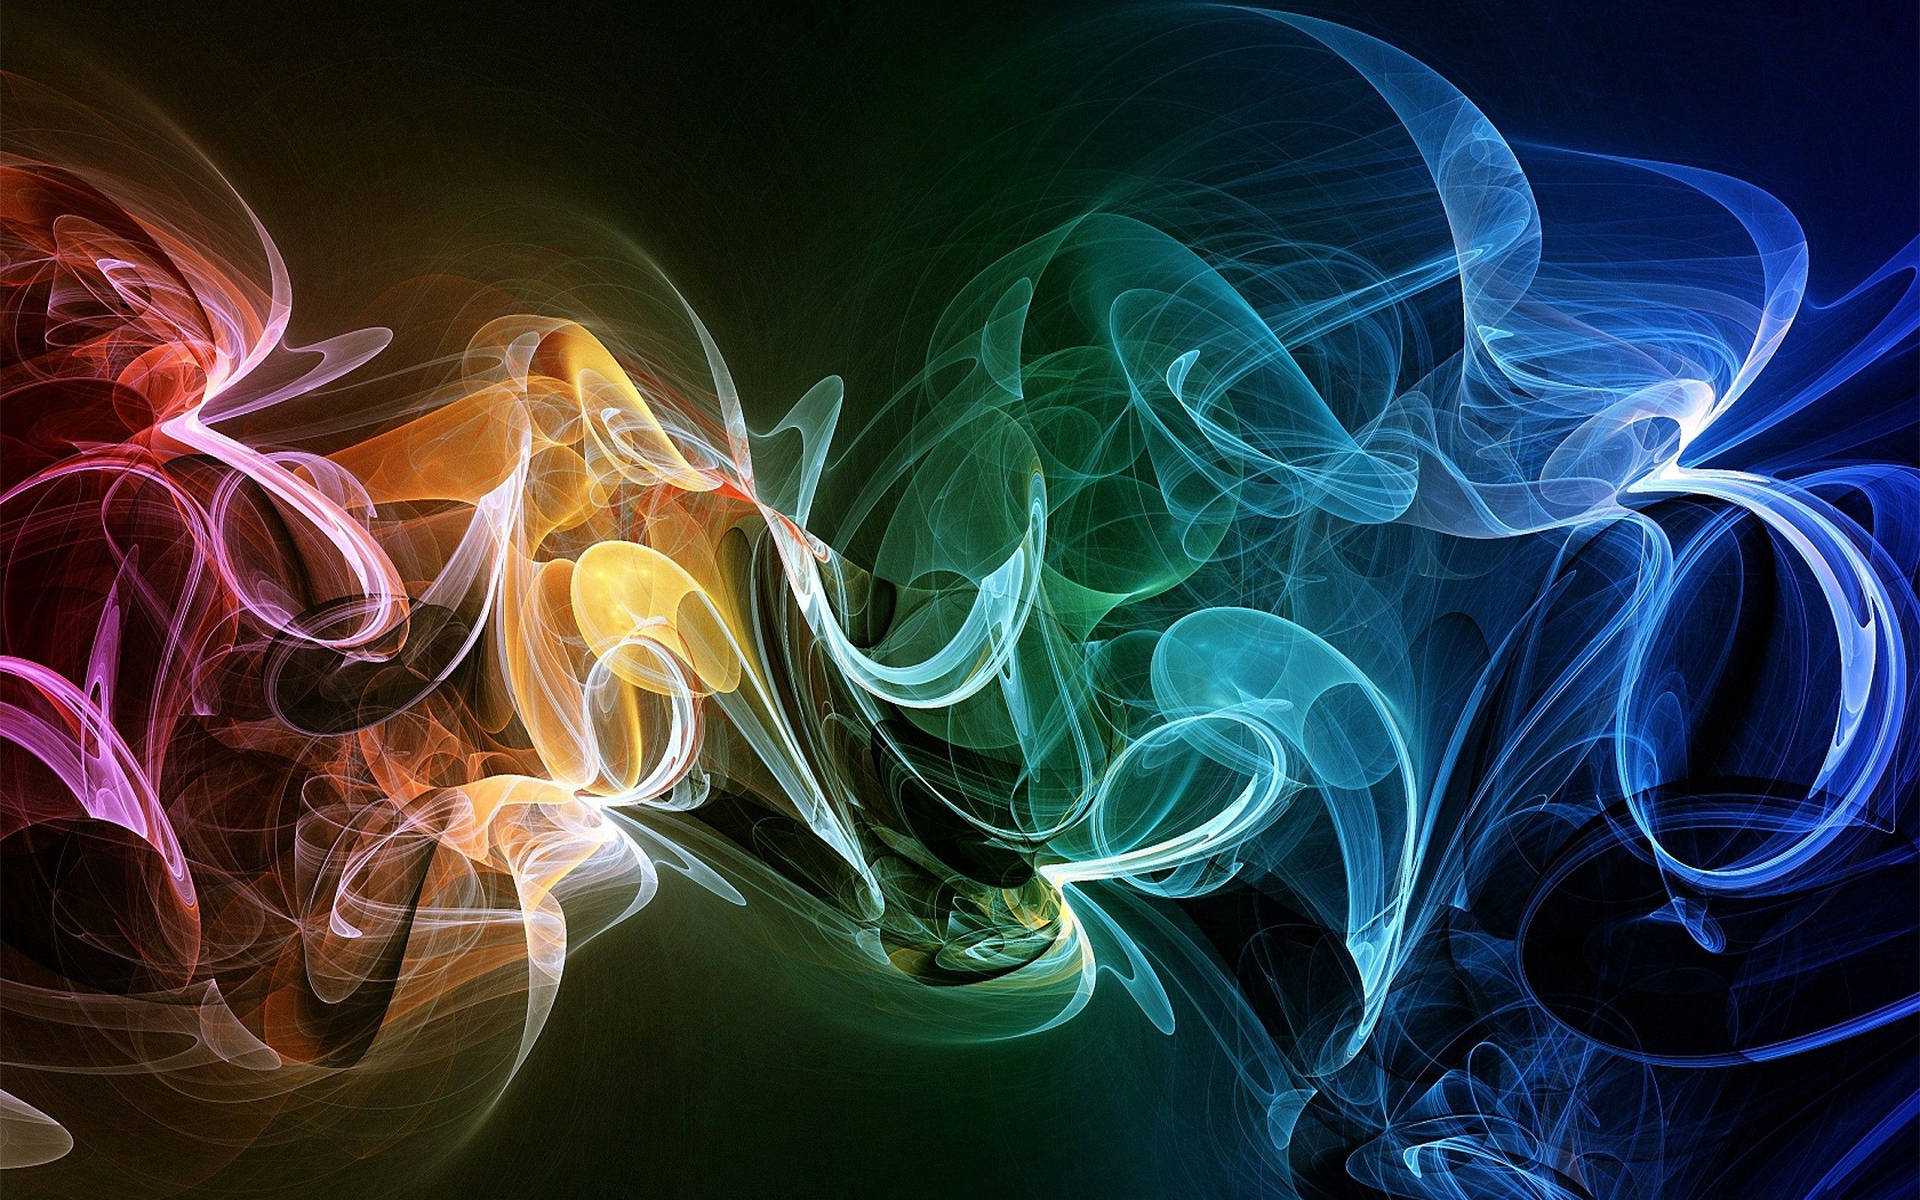 “An Intoxicatingly Colorful Cloud of Smoke